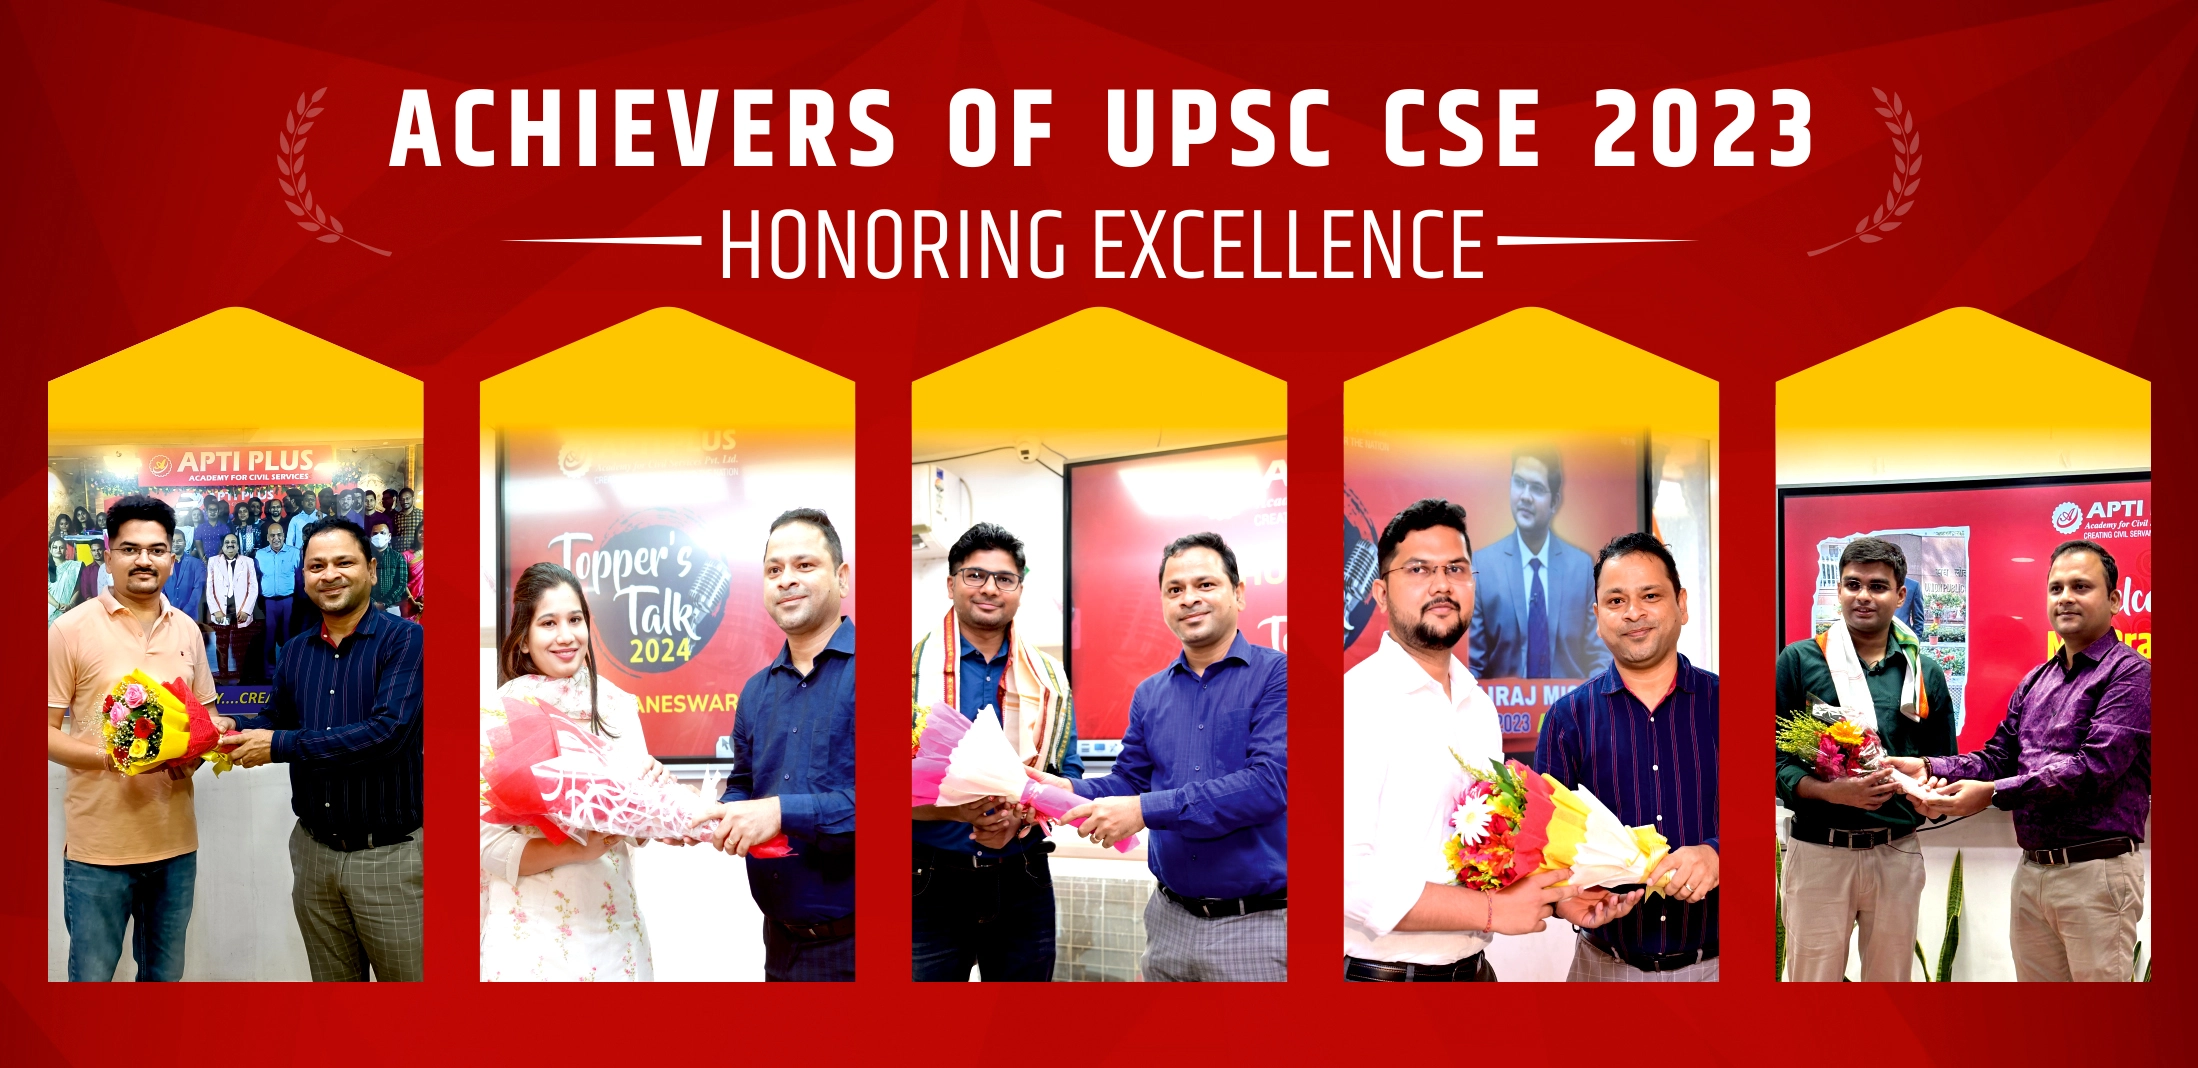 Upsc toppers 2023